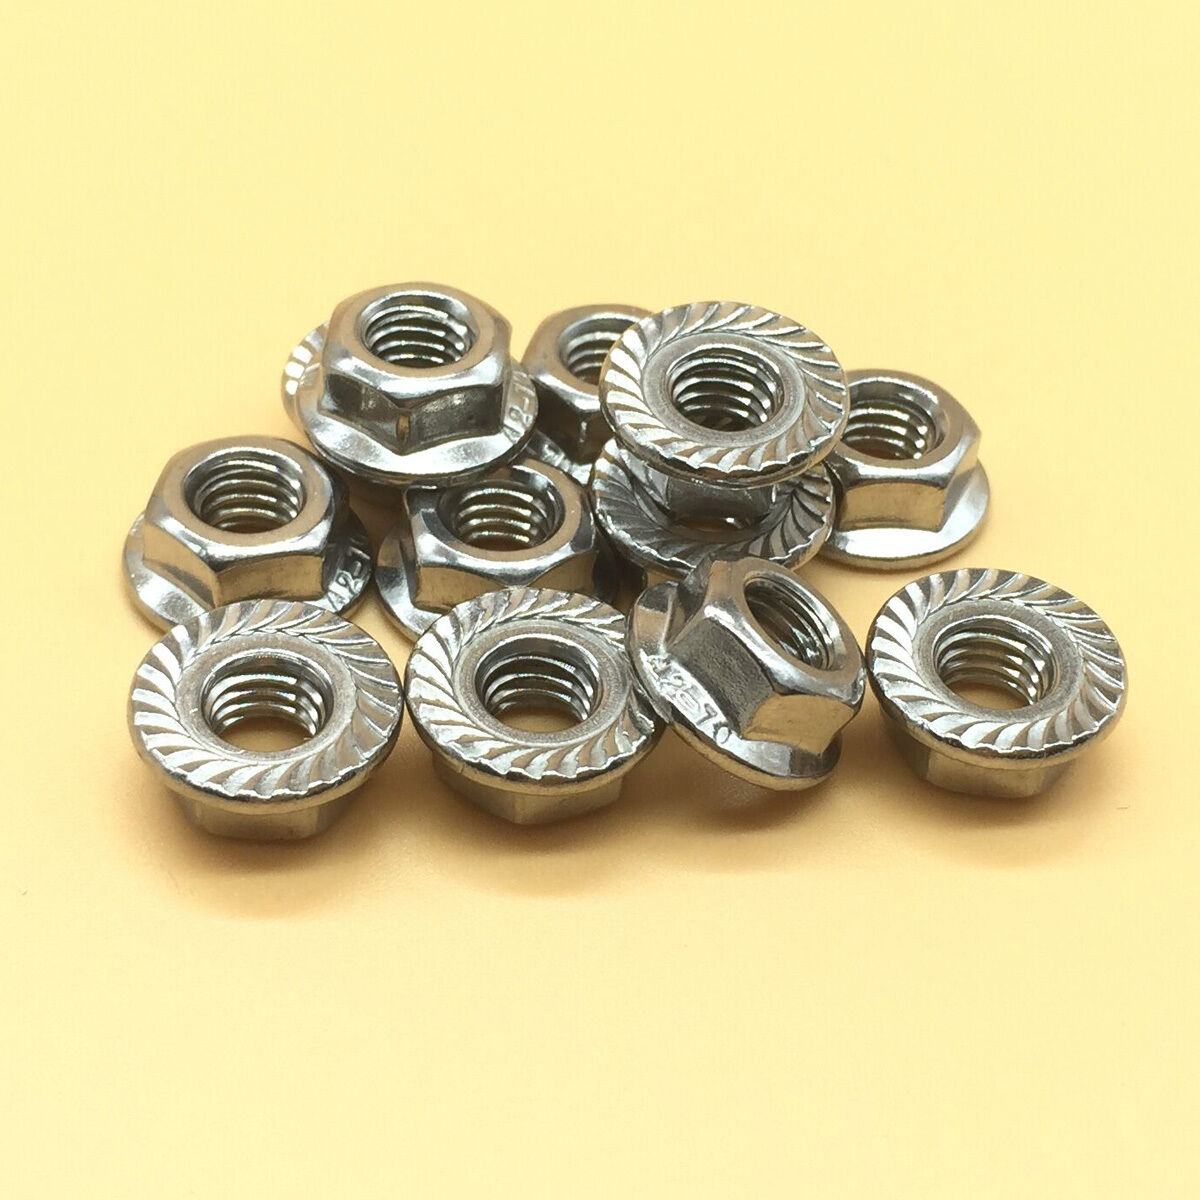 12 Pcs M12 x 1.75 Stainless Steel Flange Hex Nut Right Hand Thread [M1]